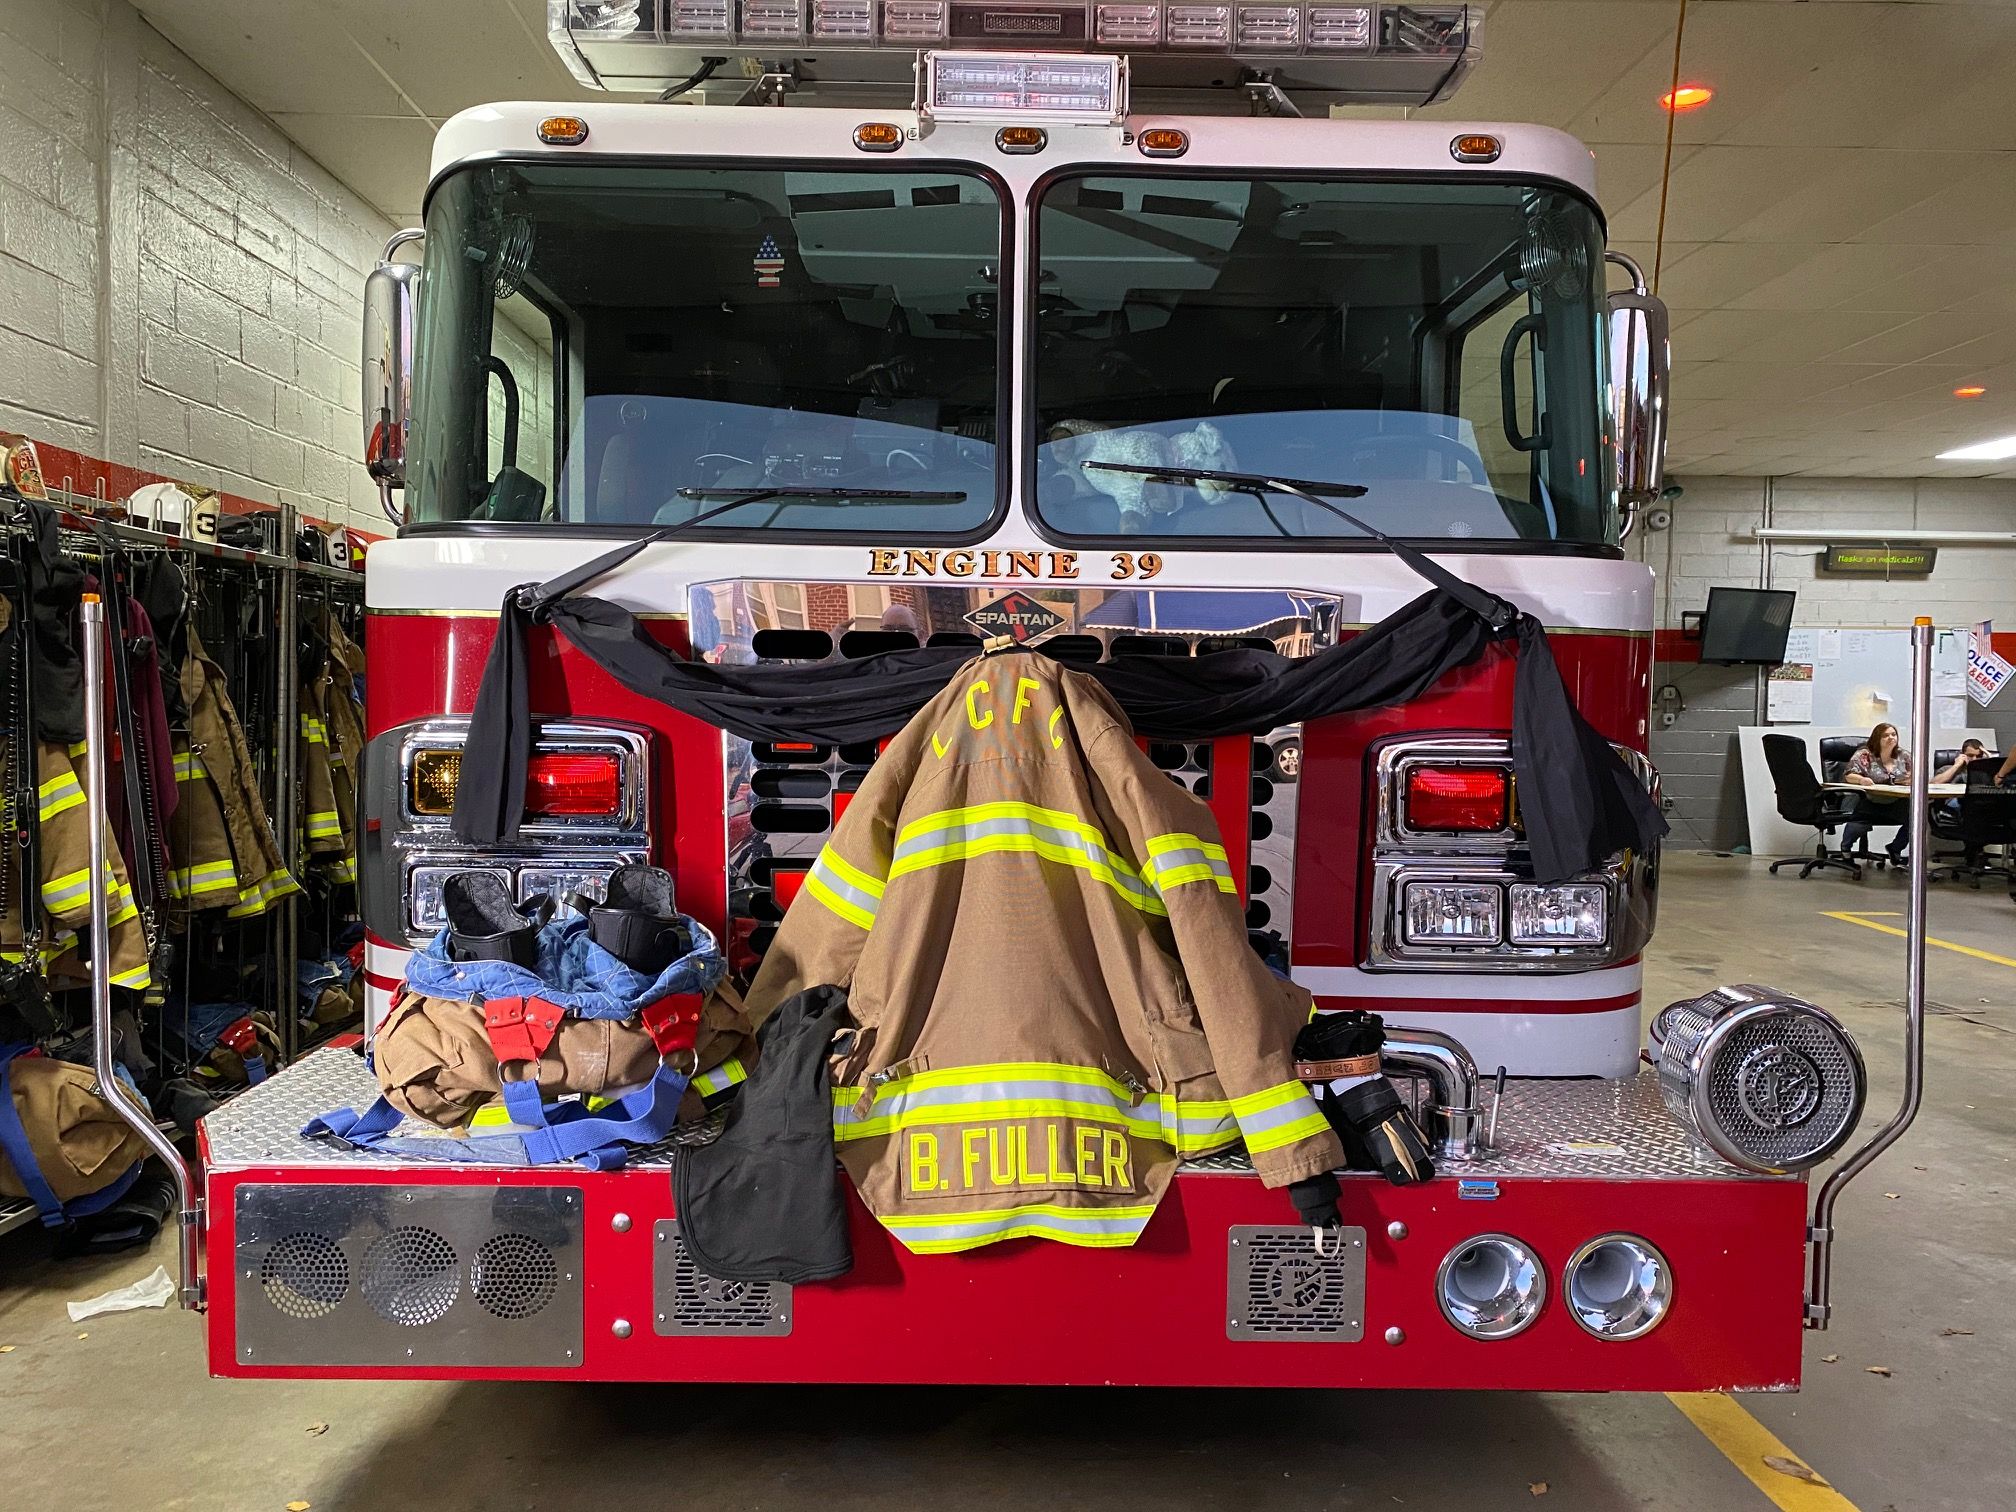 Lower Chichester was able to replace 10 sets of firefighting gear with the grant